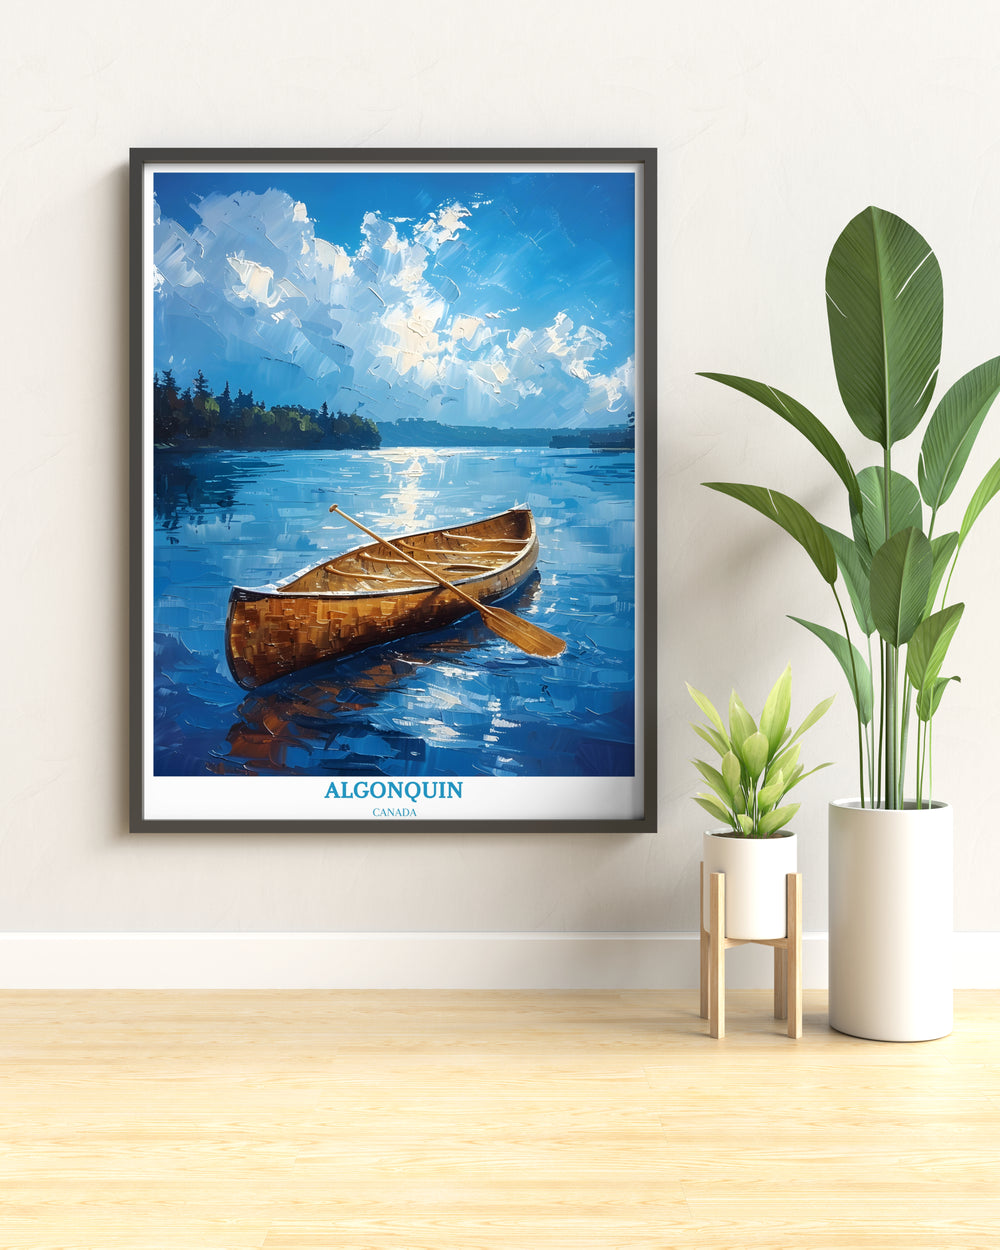 Bring the outdoors inside with an Algonquin Park Poster, showcasing the park's natural wonders and scenic vistas